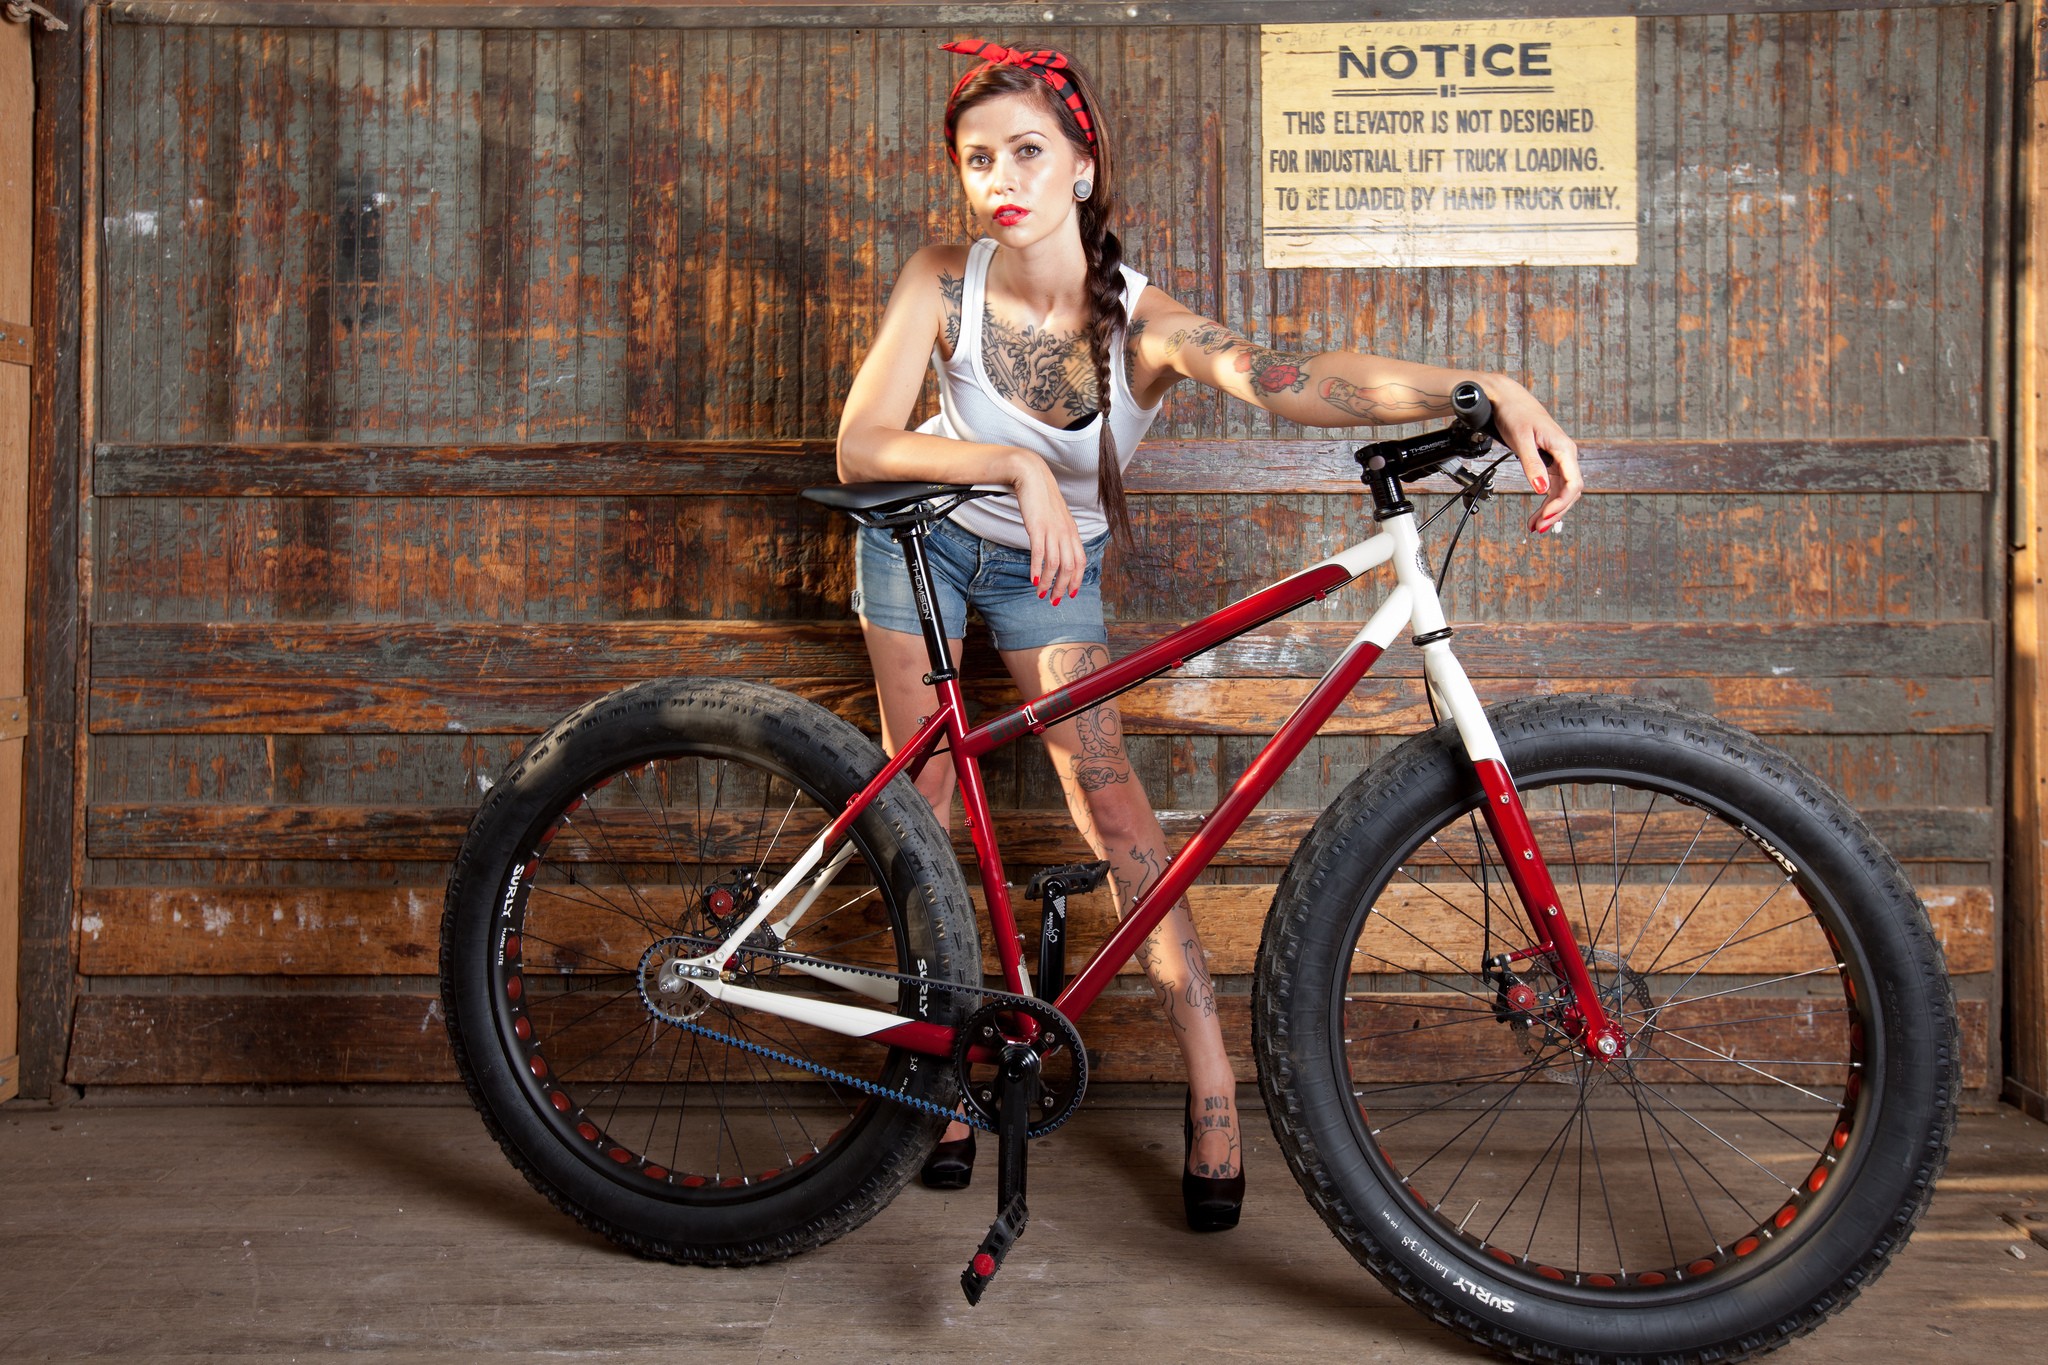 Women Model Women With Bicycles Tattoo Tank Top Hairband Braids Brunette Red Lipstick 2048x1365